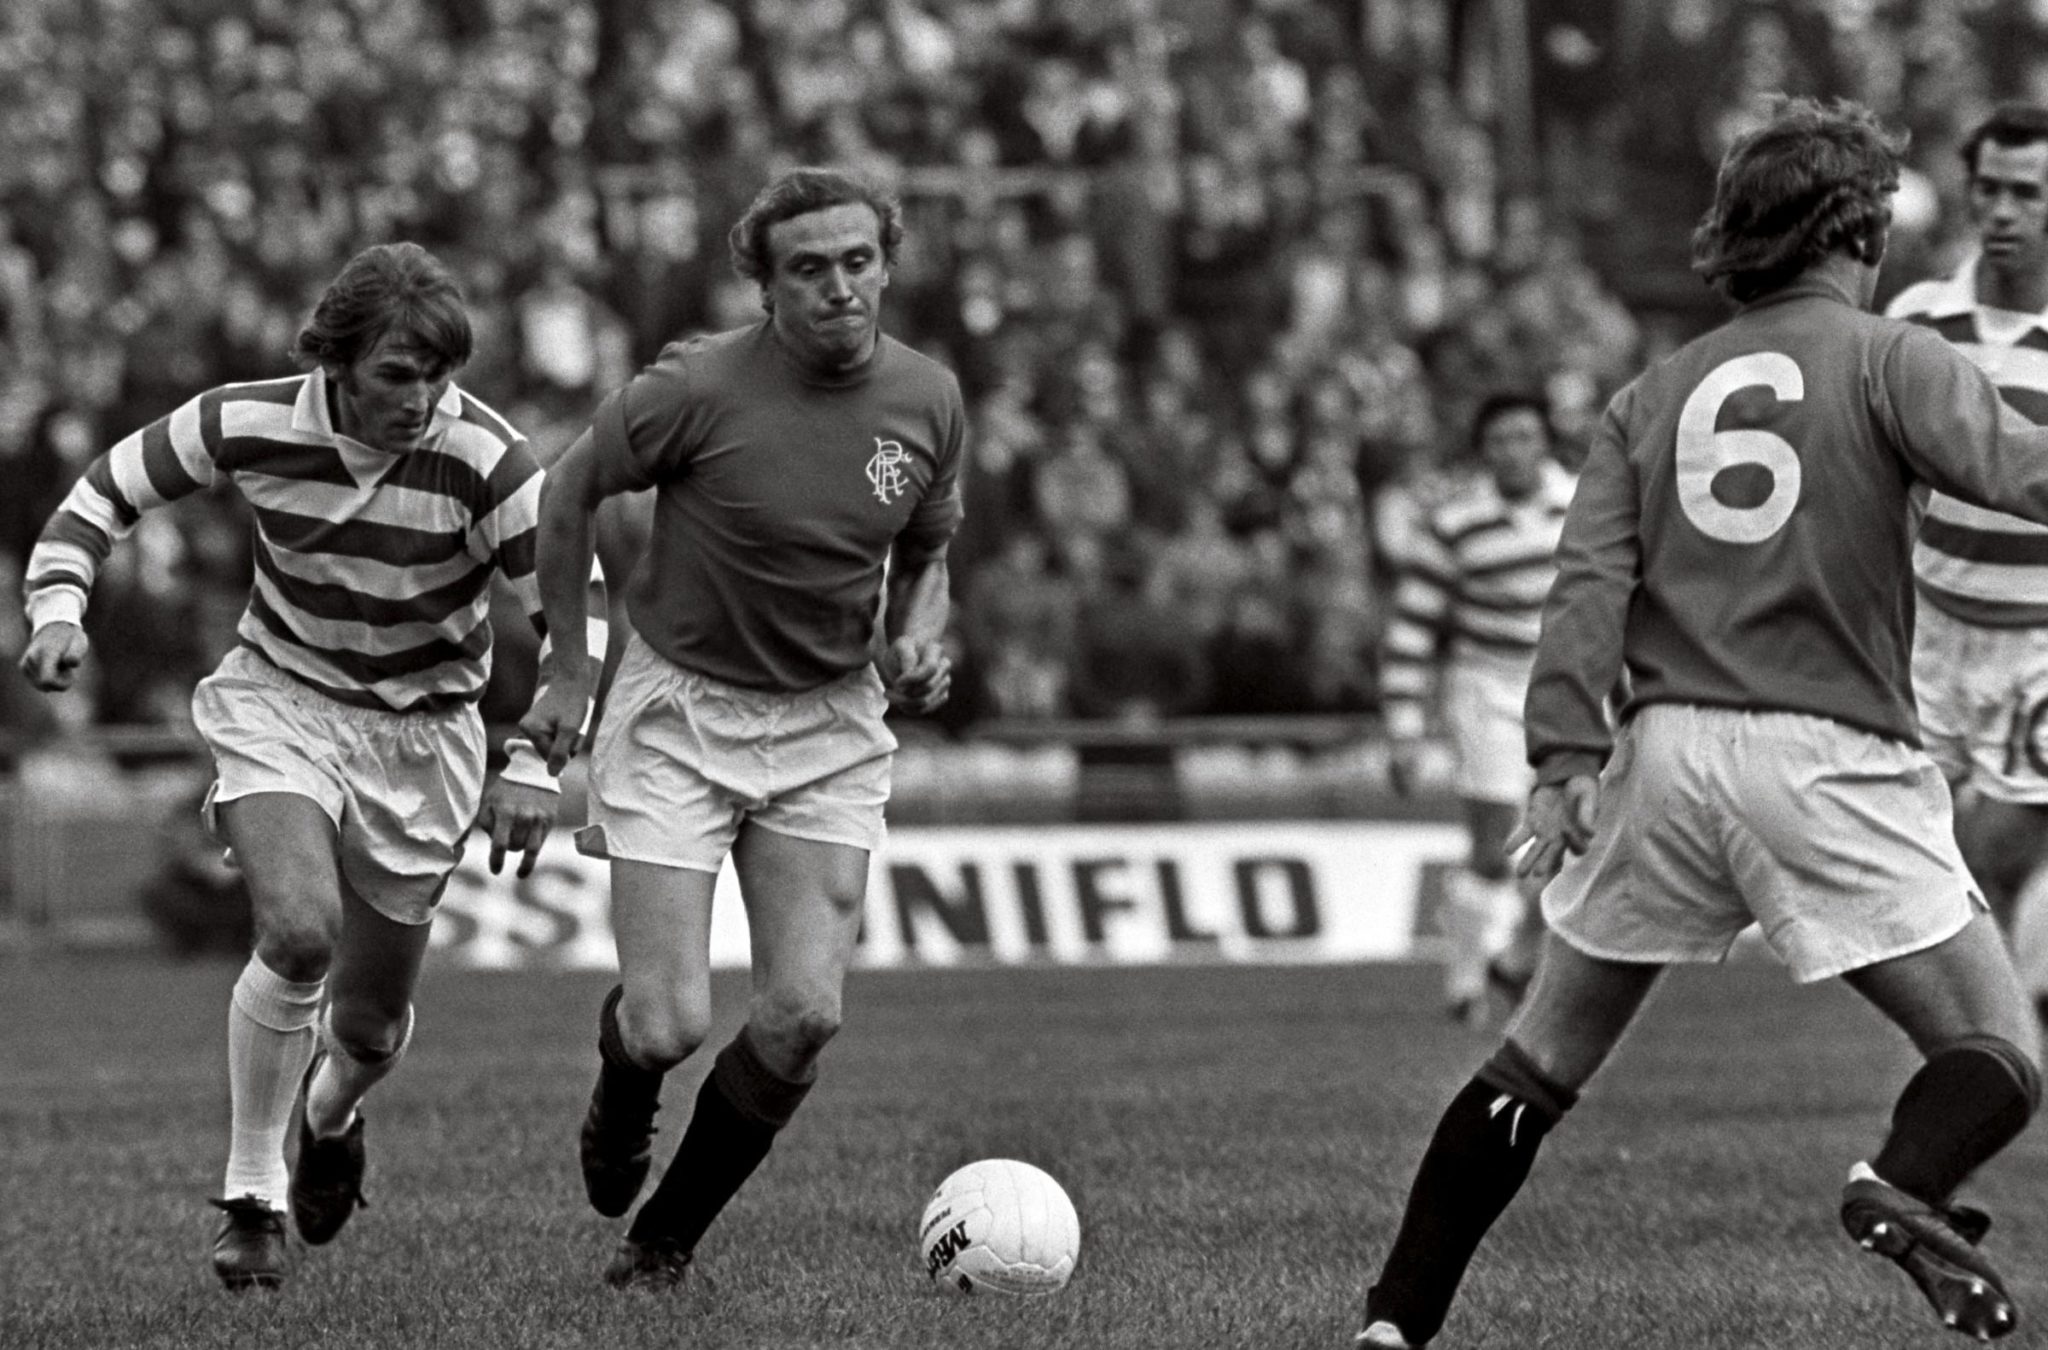 Kenny Dalglish races away from a defender during a game between Celtic and Rangers